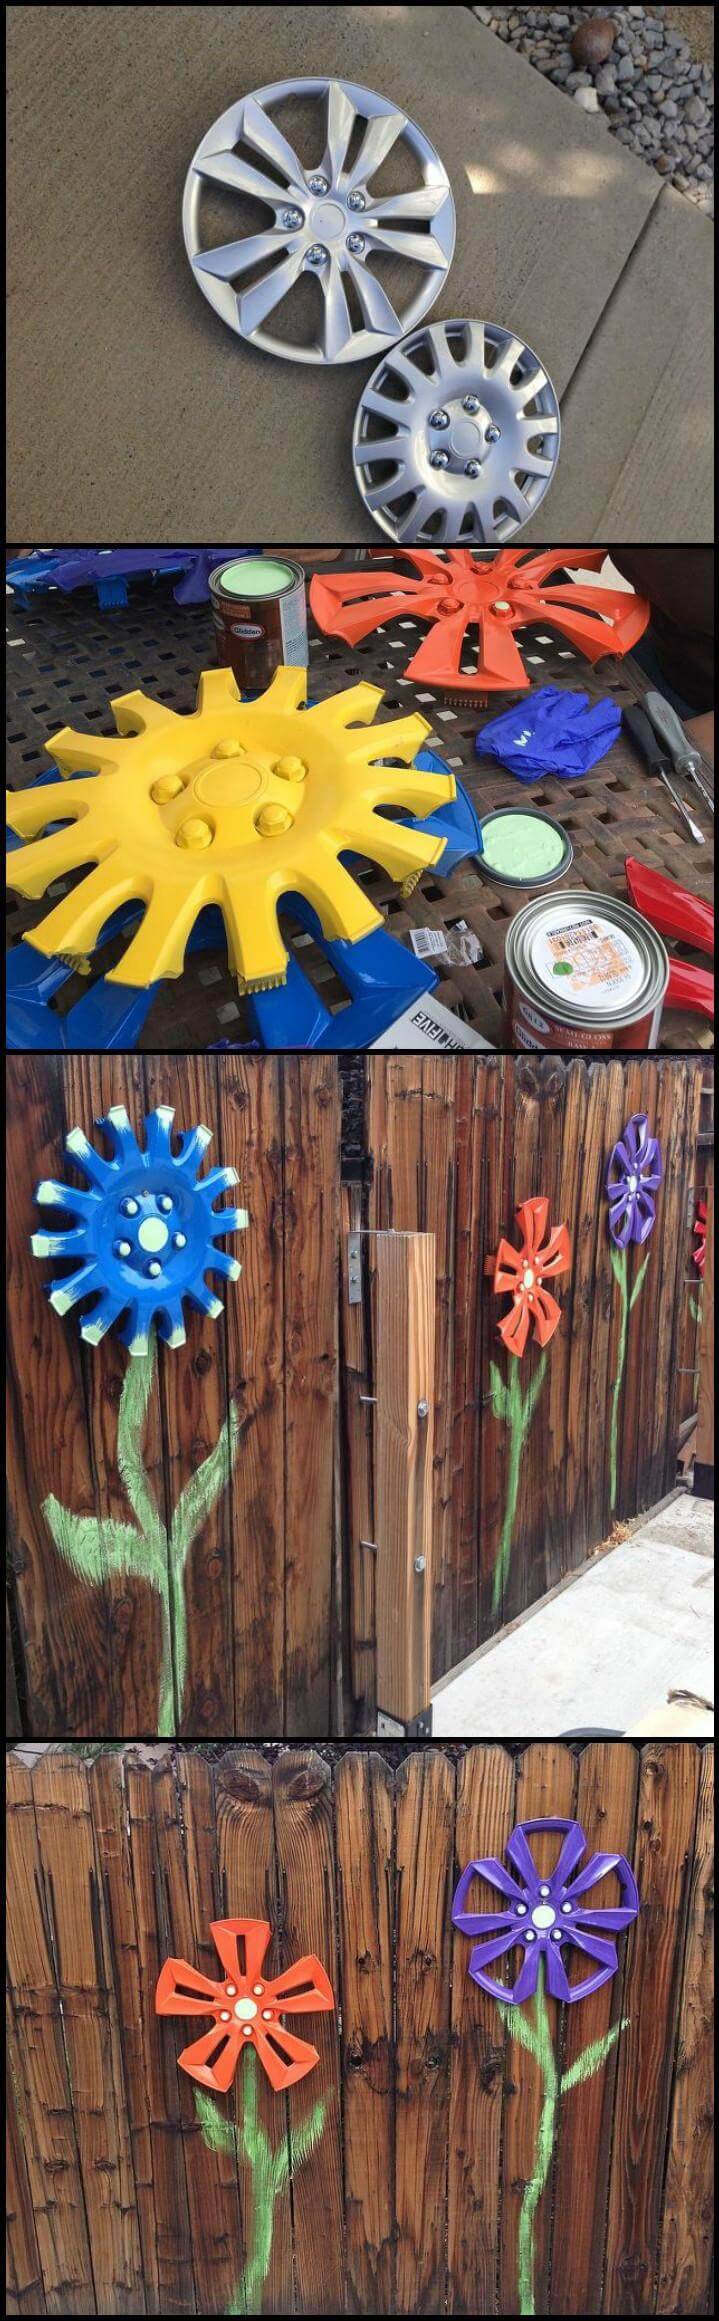 DIY painted wheel cover fence flowers